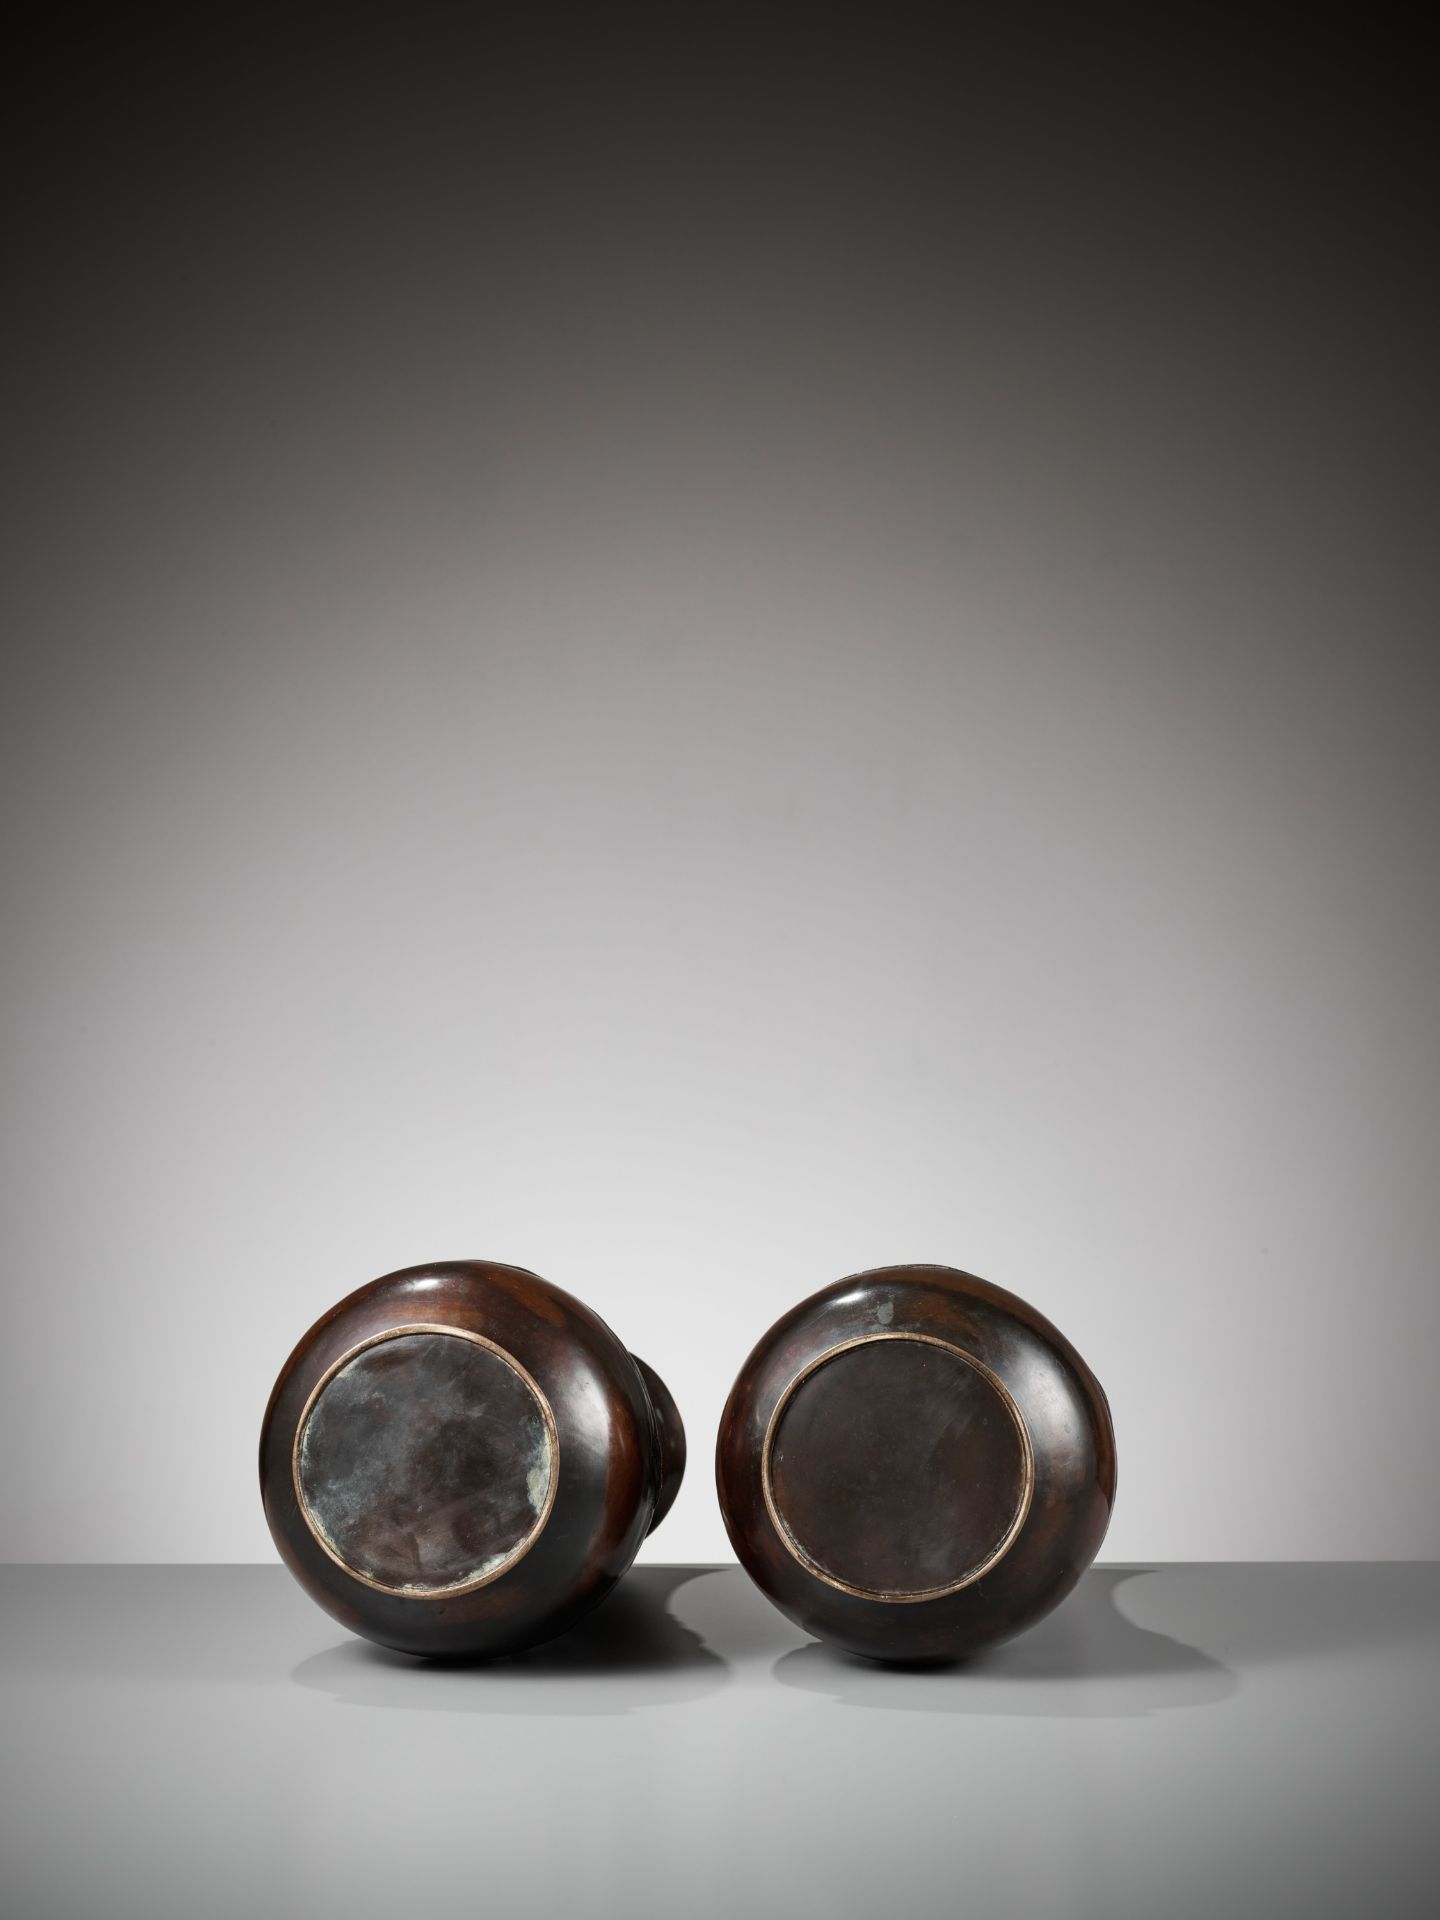 A PAIR OF BRONZE VASES DEPICTING EGRETS - Image 8 of 8